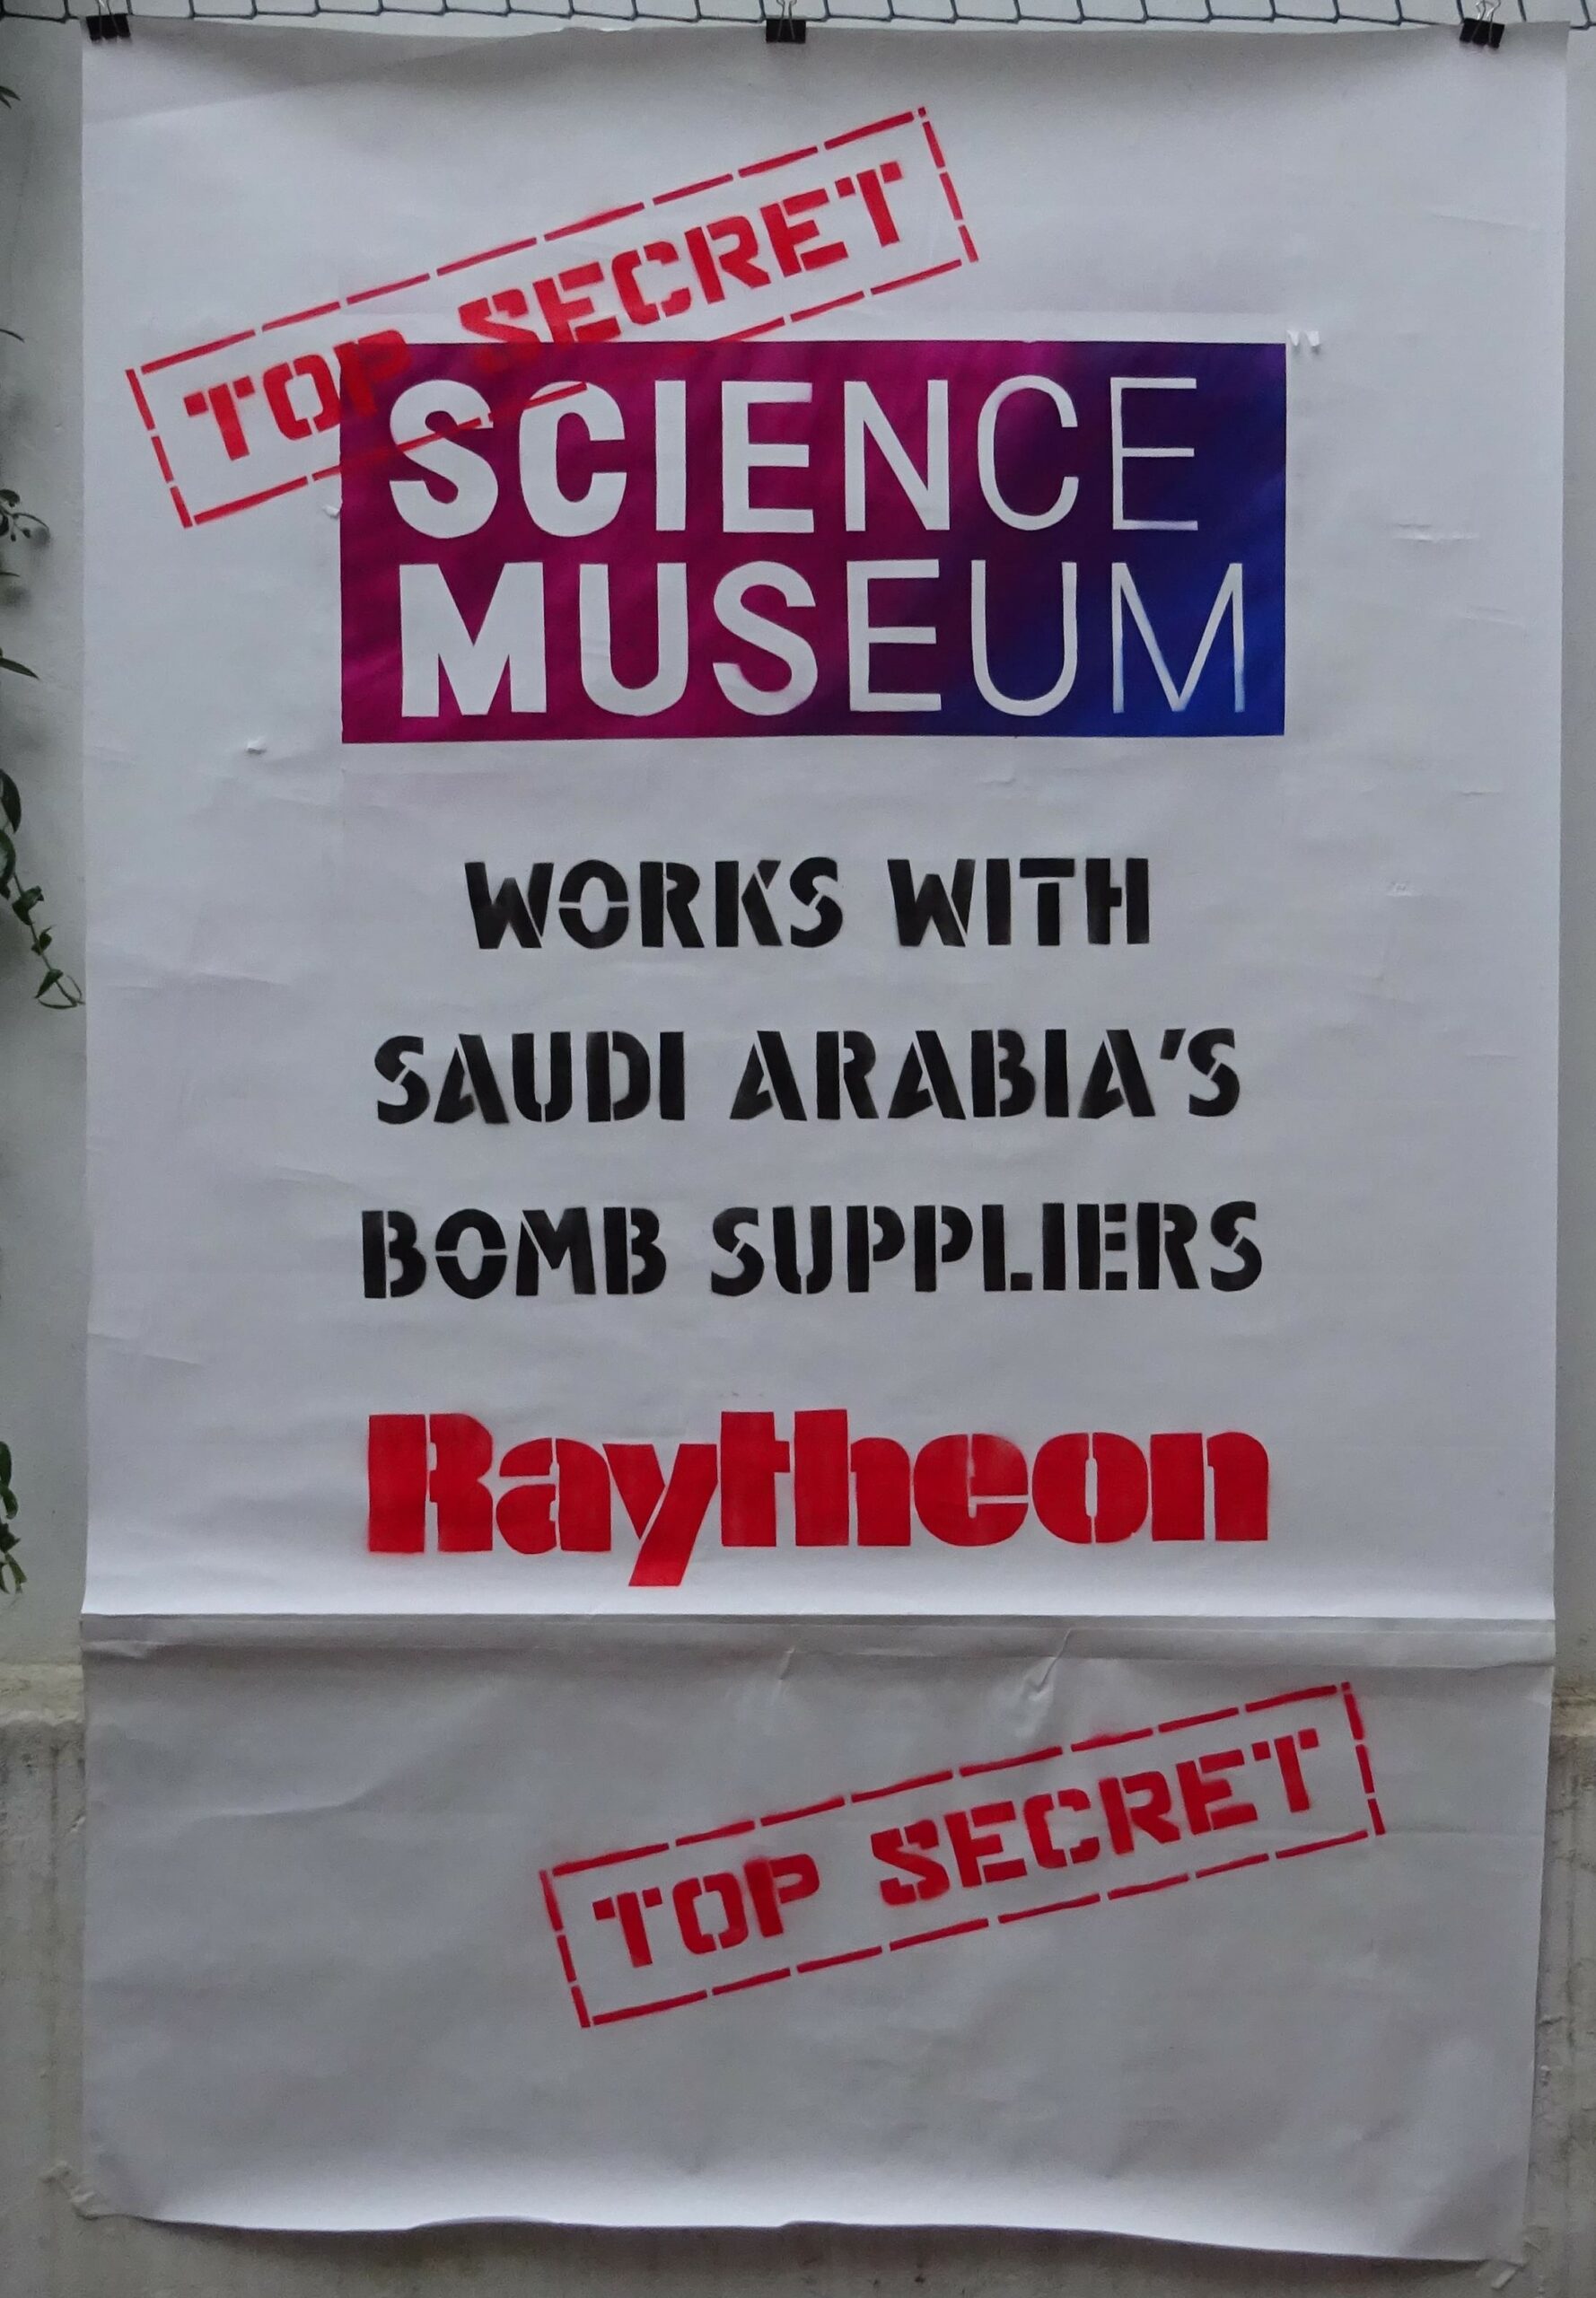 A poster that reads 'Science Museum' 'Works with Saudi Arabia's Bomb Suppliers Raytheon' and has 'Top Secret' stamps.